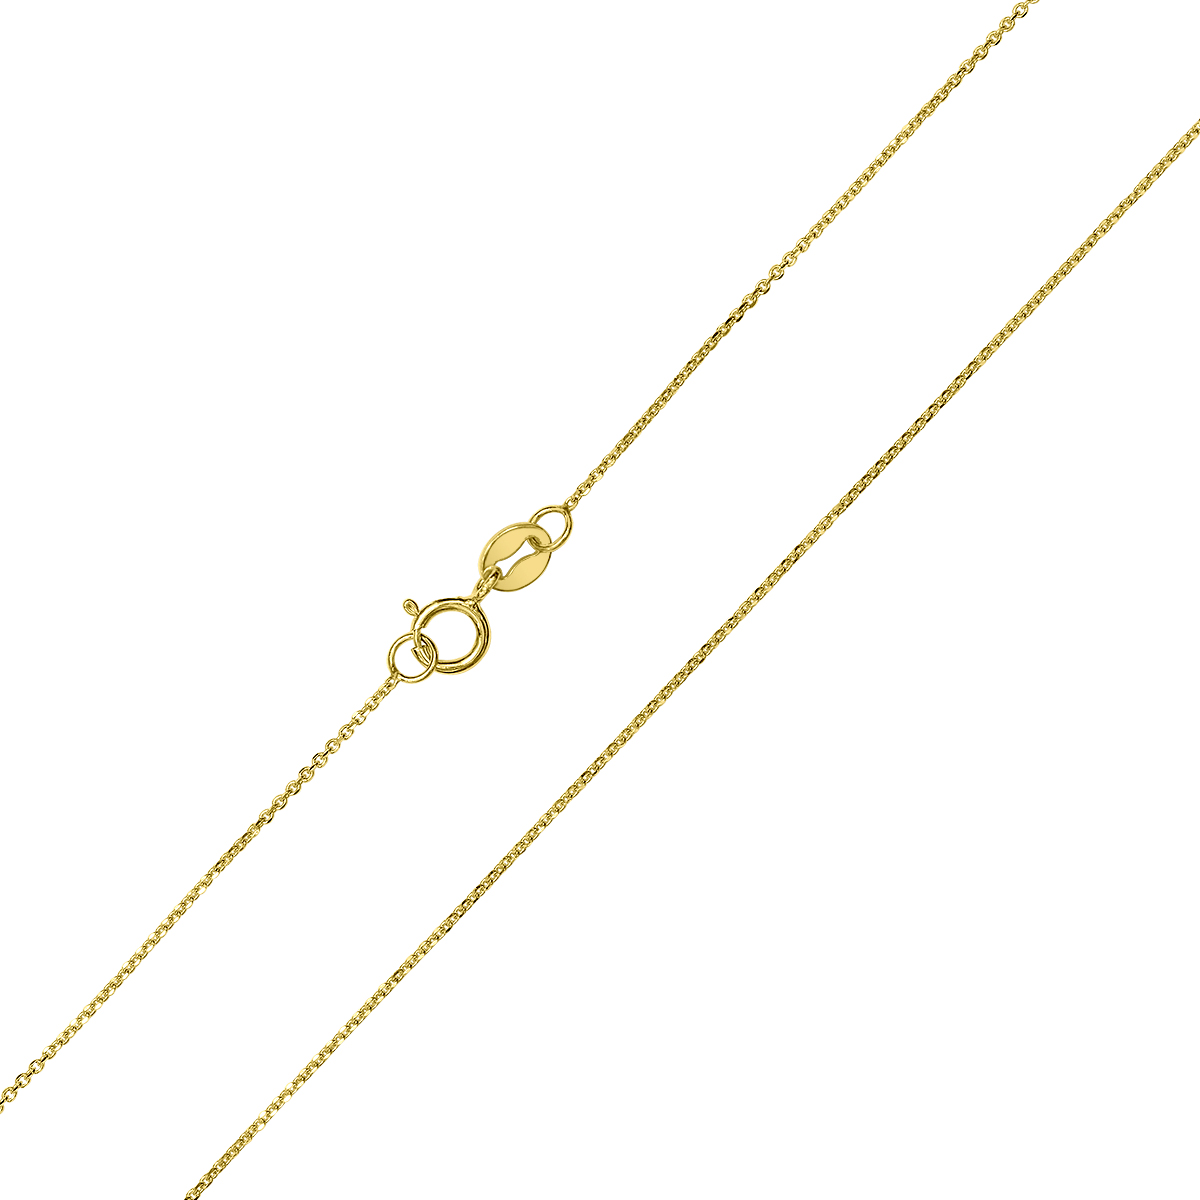 10K Yellow Gold 0.5MM Flat Cable Chain with Spring Ring Clasp - 18 Inch